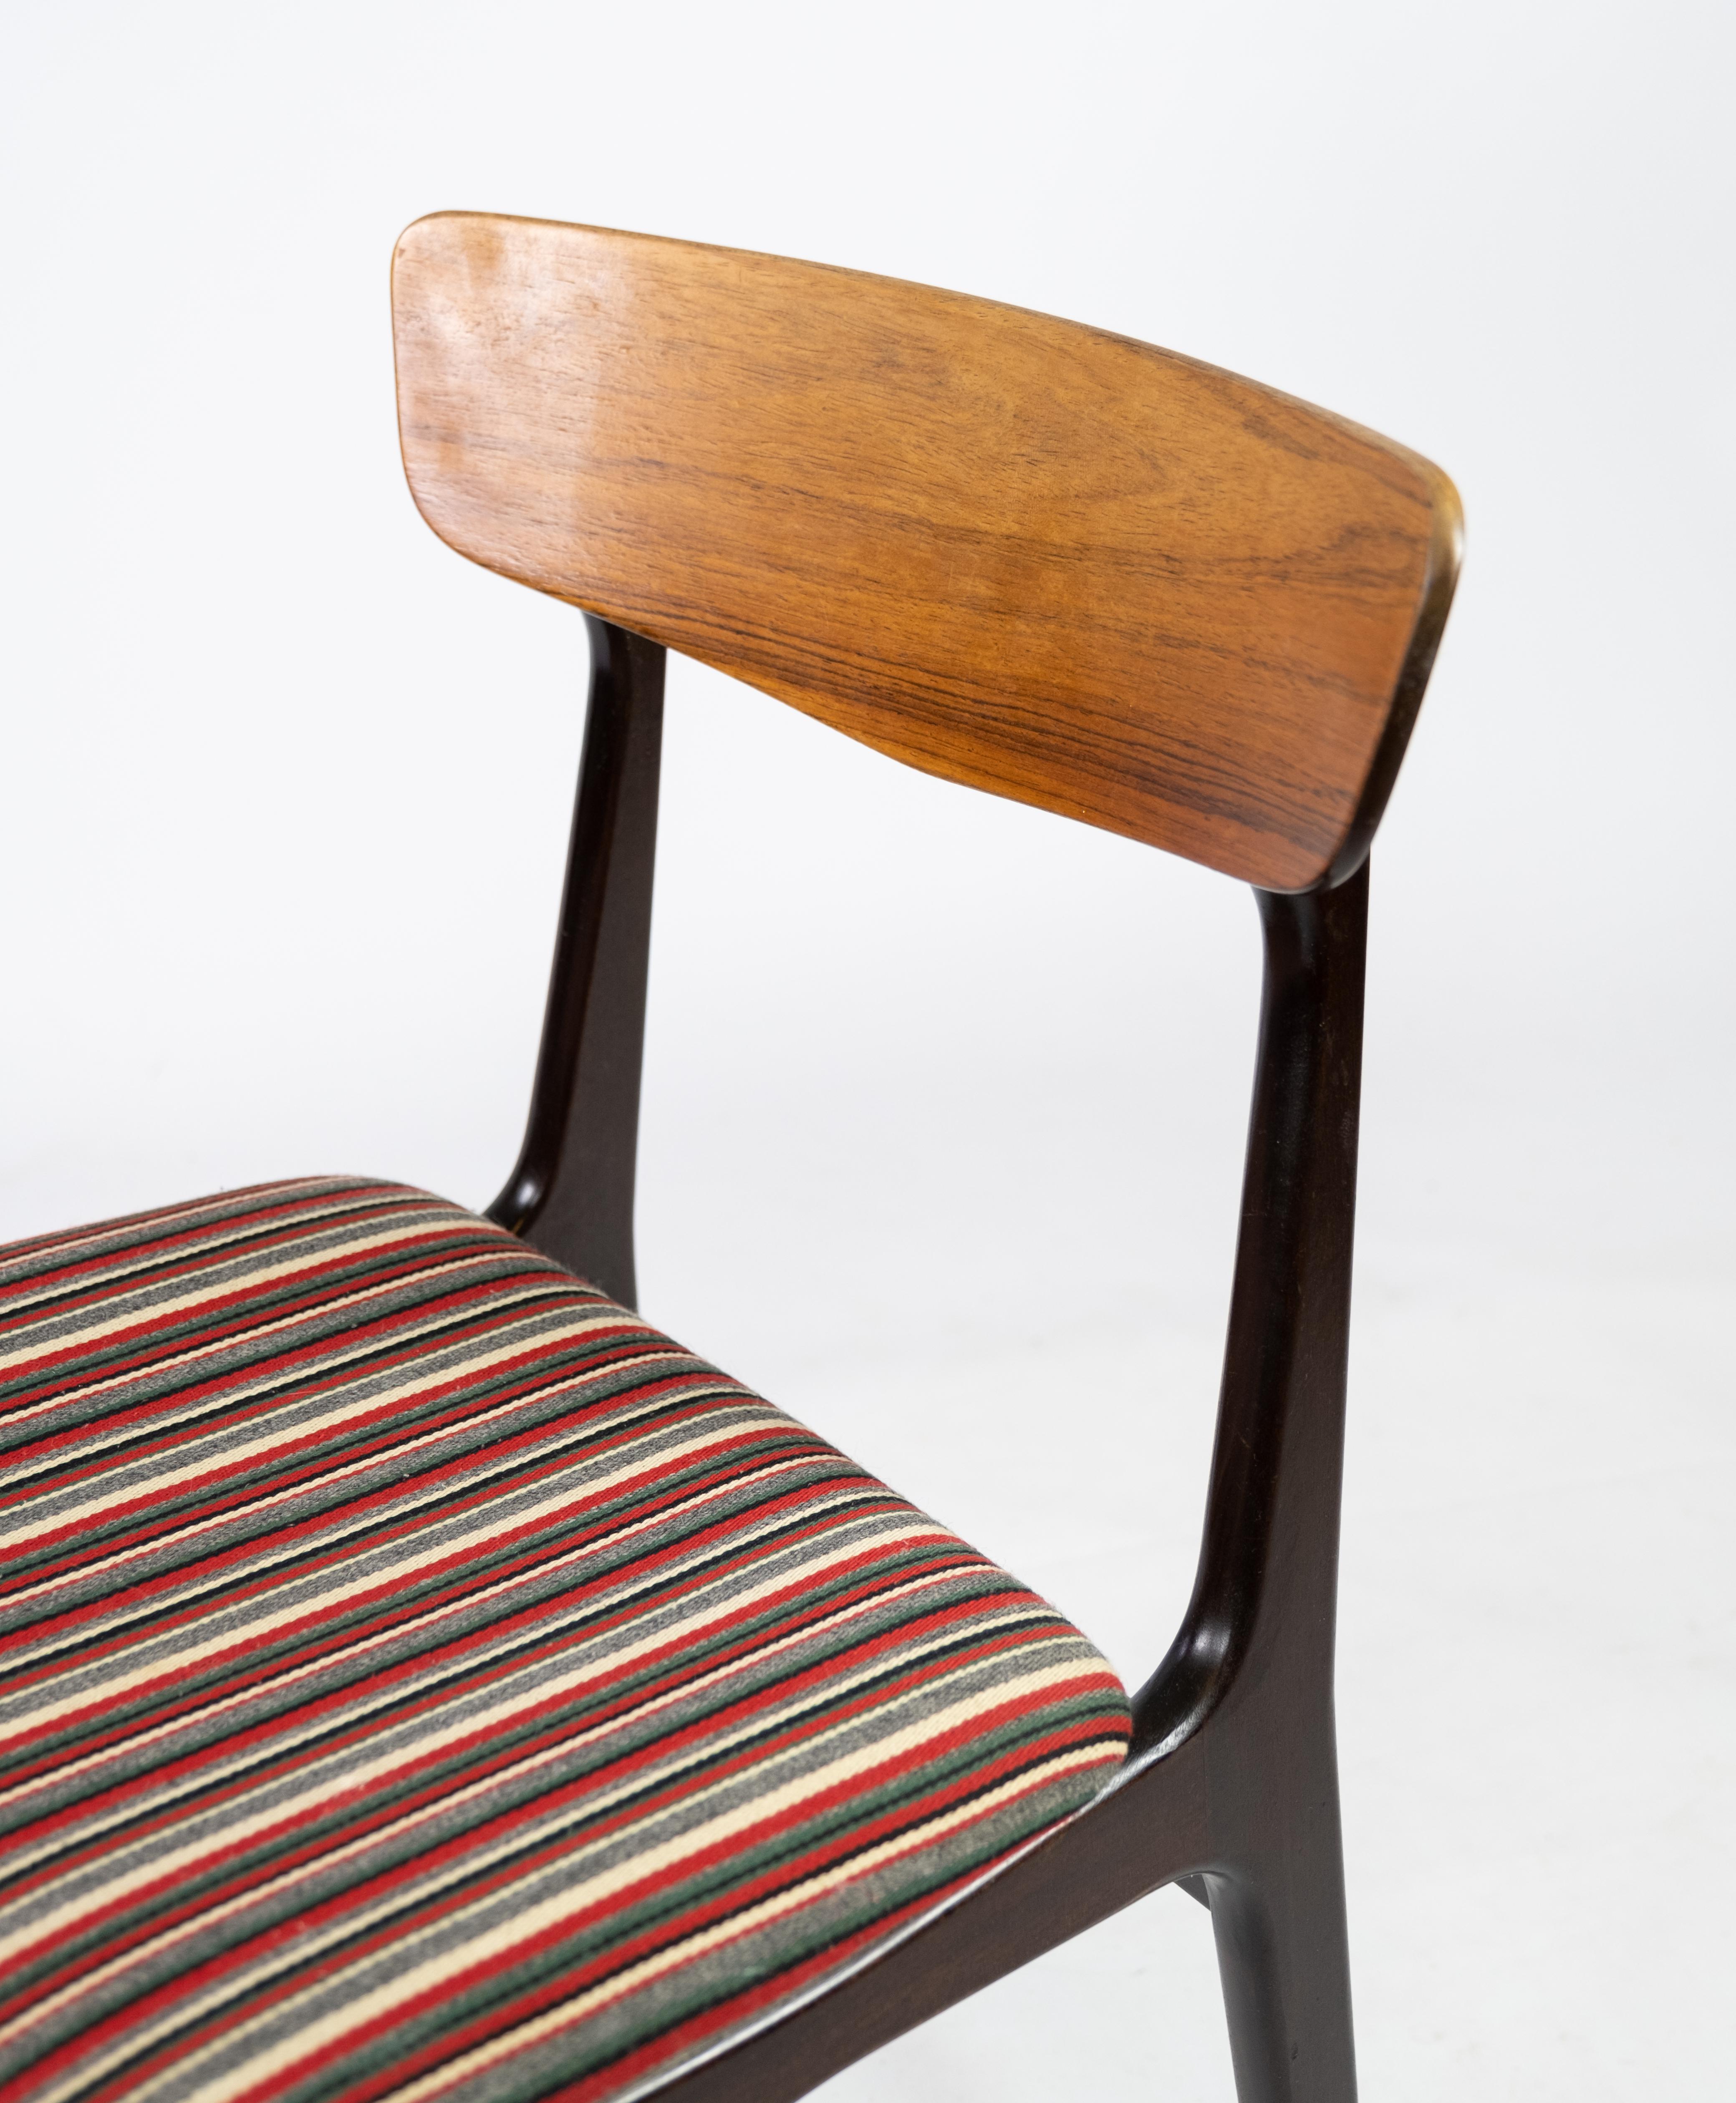 Scandinavian Modern Dining Room Chair in Rosewood of Danish Design, 1960s For Sale